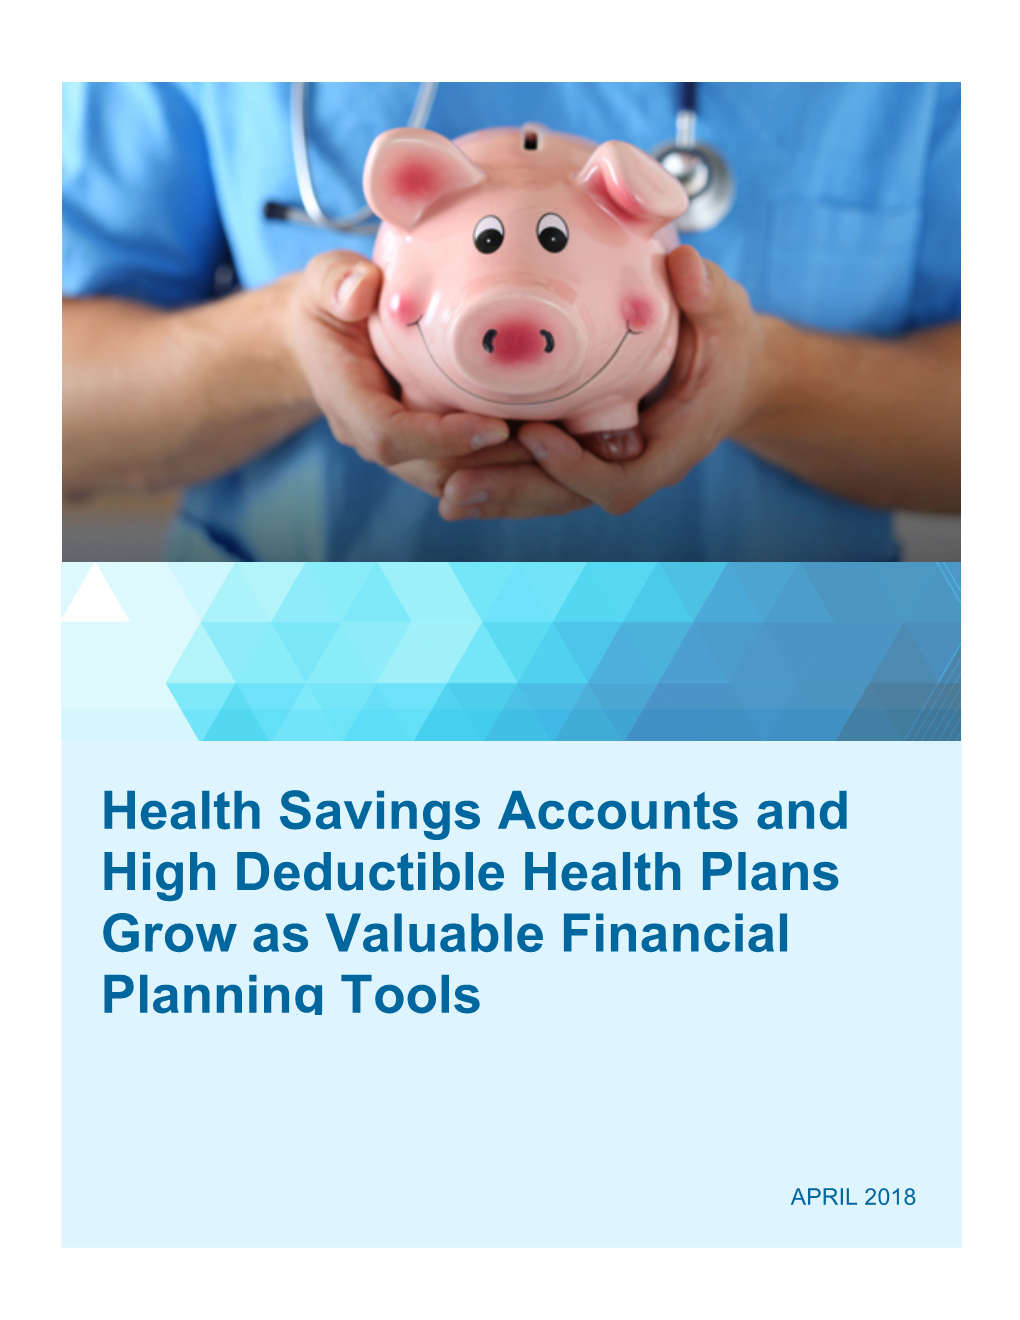 Health Savings Accounts and High Deductible Health Plans Grow As Valuable Financial Planning Tools